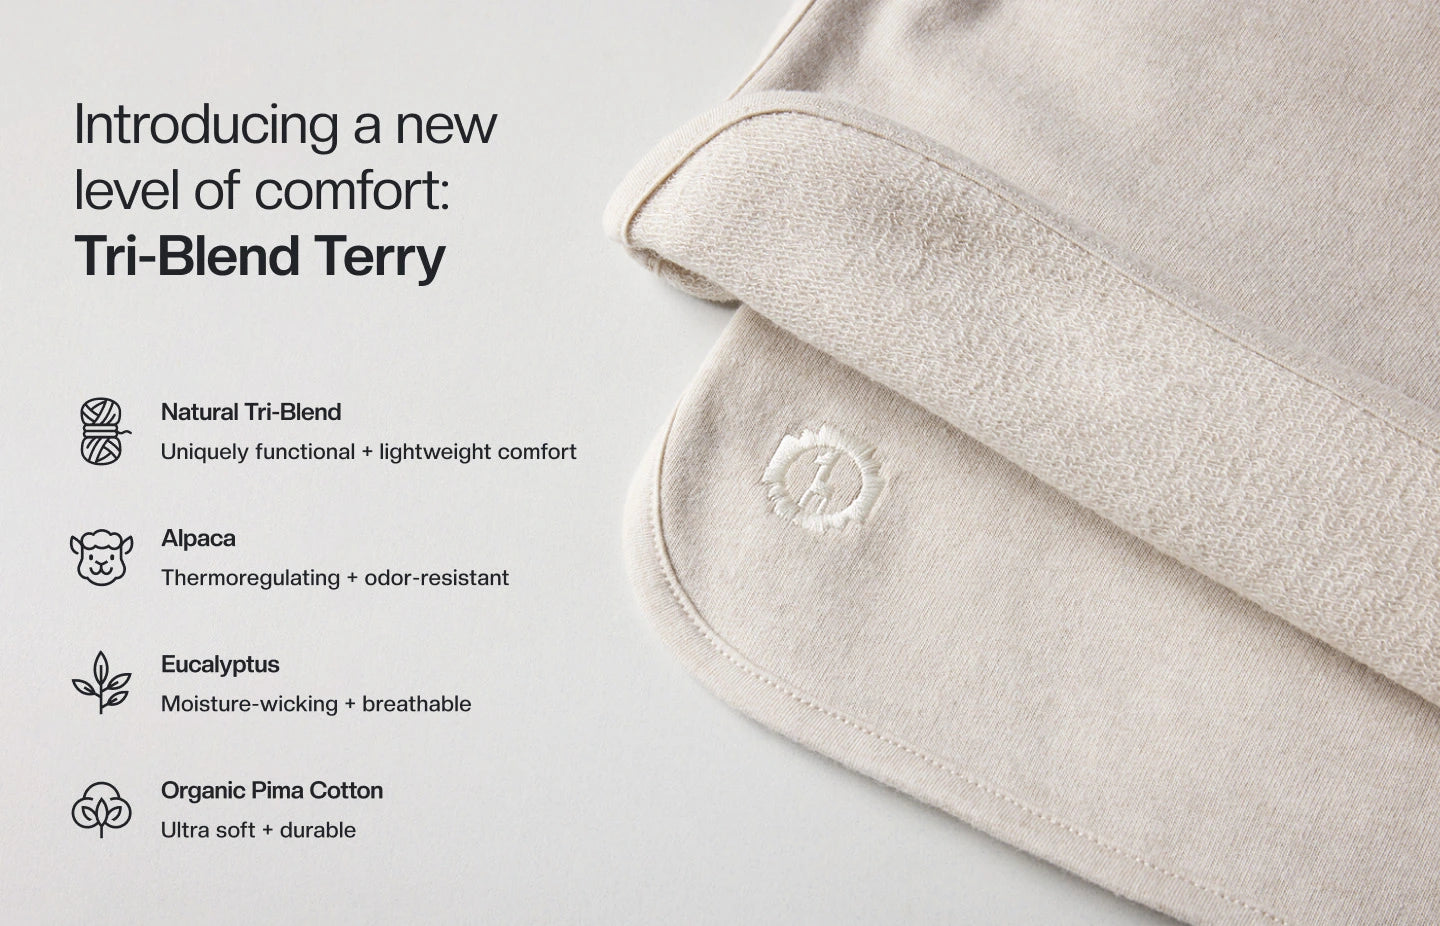 Introducing a new level of comfort: Tri-Blend Terry. natural Tri-blend. Uniquely functional + lightweight comfort. Alpaca: Thermoregulating + odor resistant. Eucalyptus: Moisture-wicking + breathable. Organic Pima cotton: Ultra soft + durable